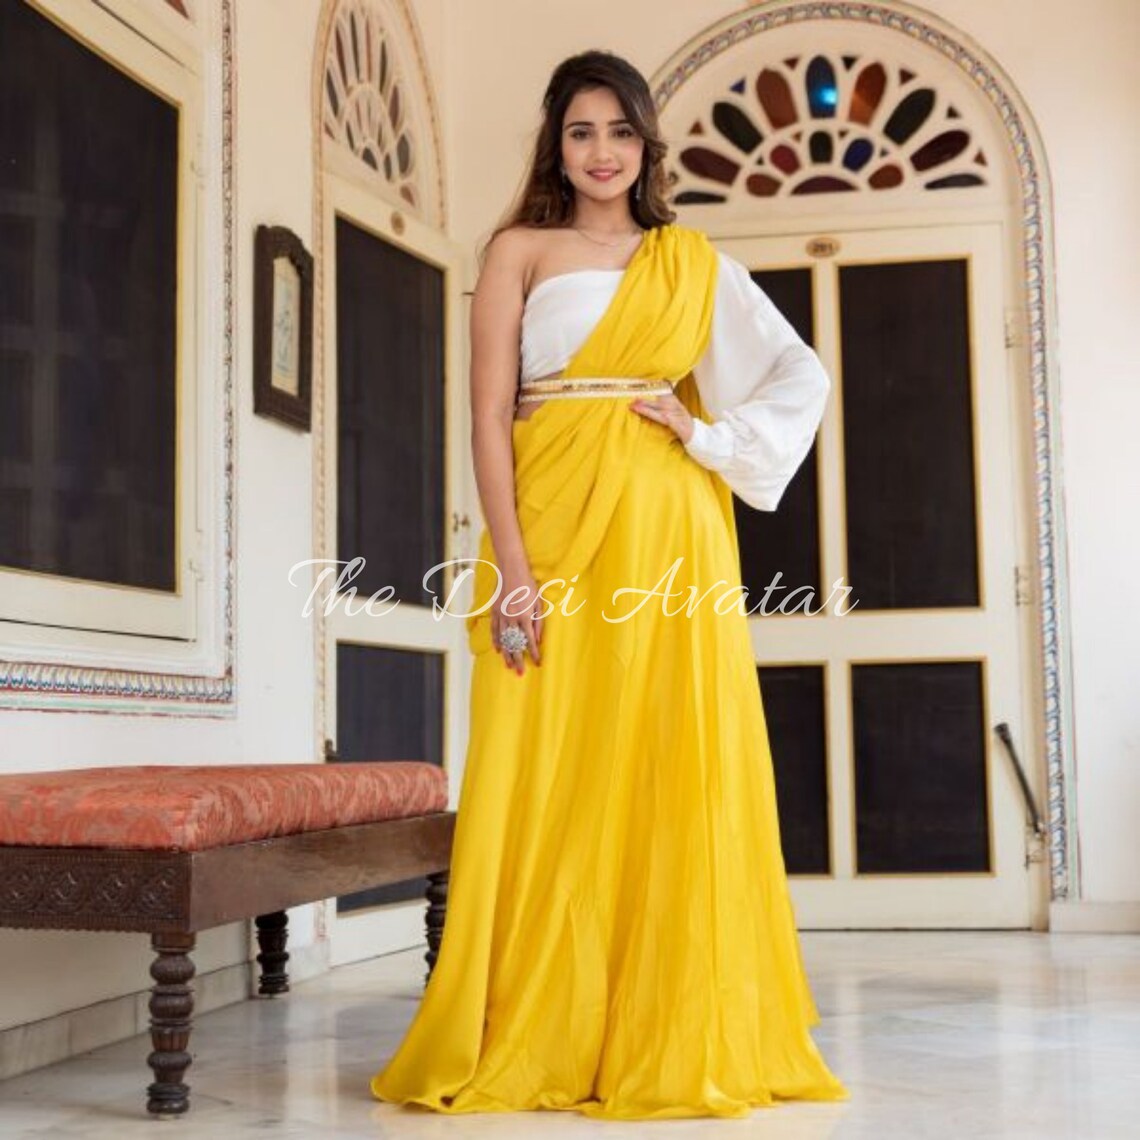 Yellow Indowestern Ready To Wear Saree With Stitched Designer Blouse And Belt, Indian Wedding Haldi Reception Party Wear Saree For Women